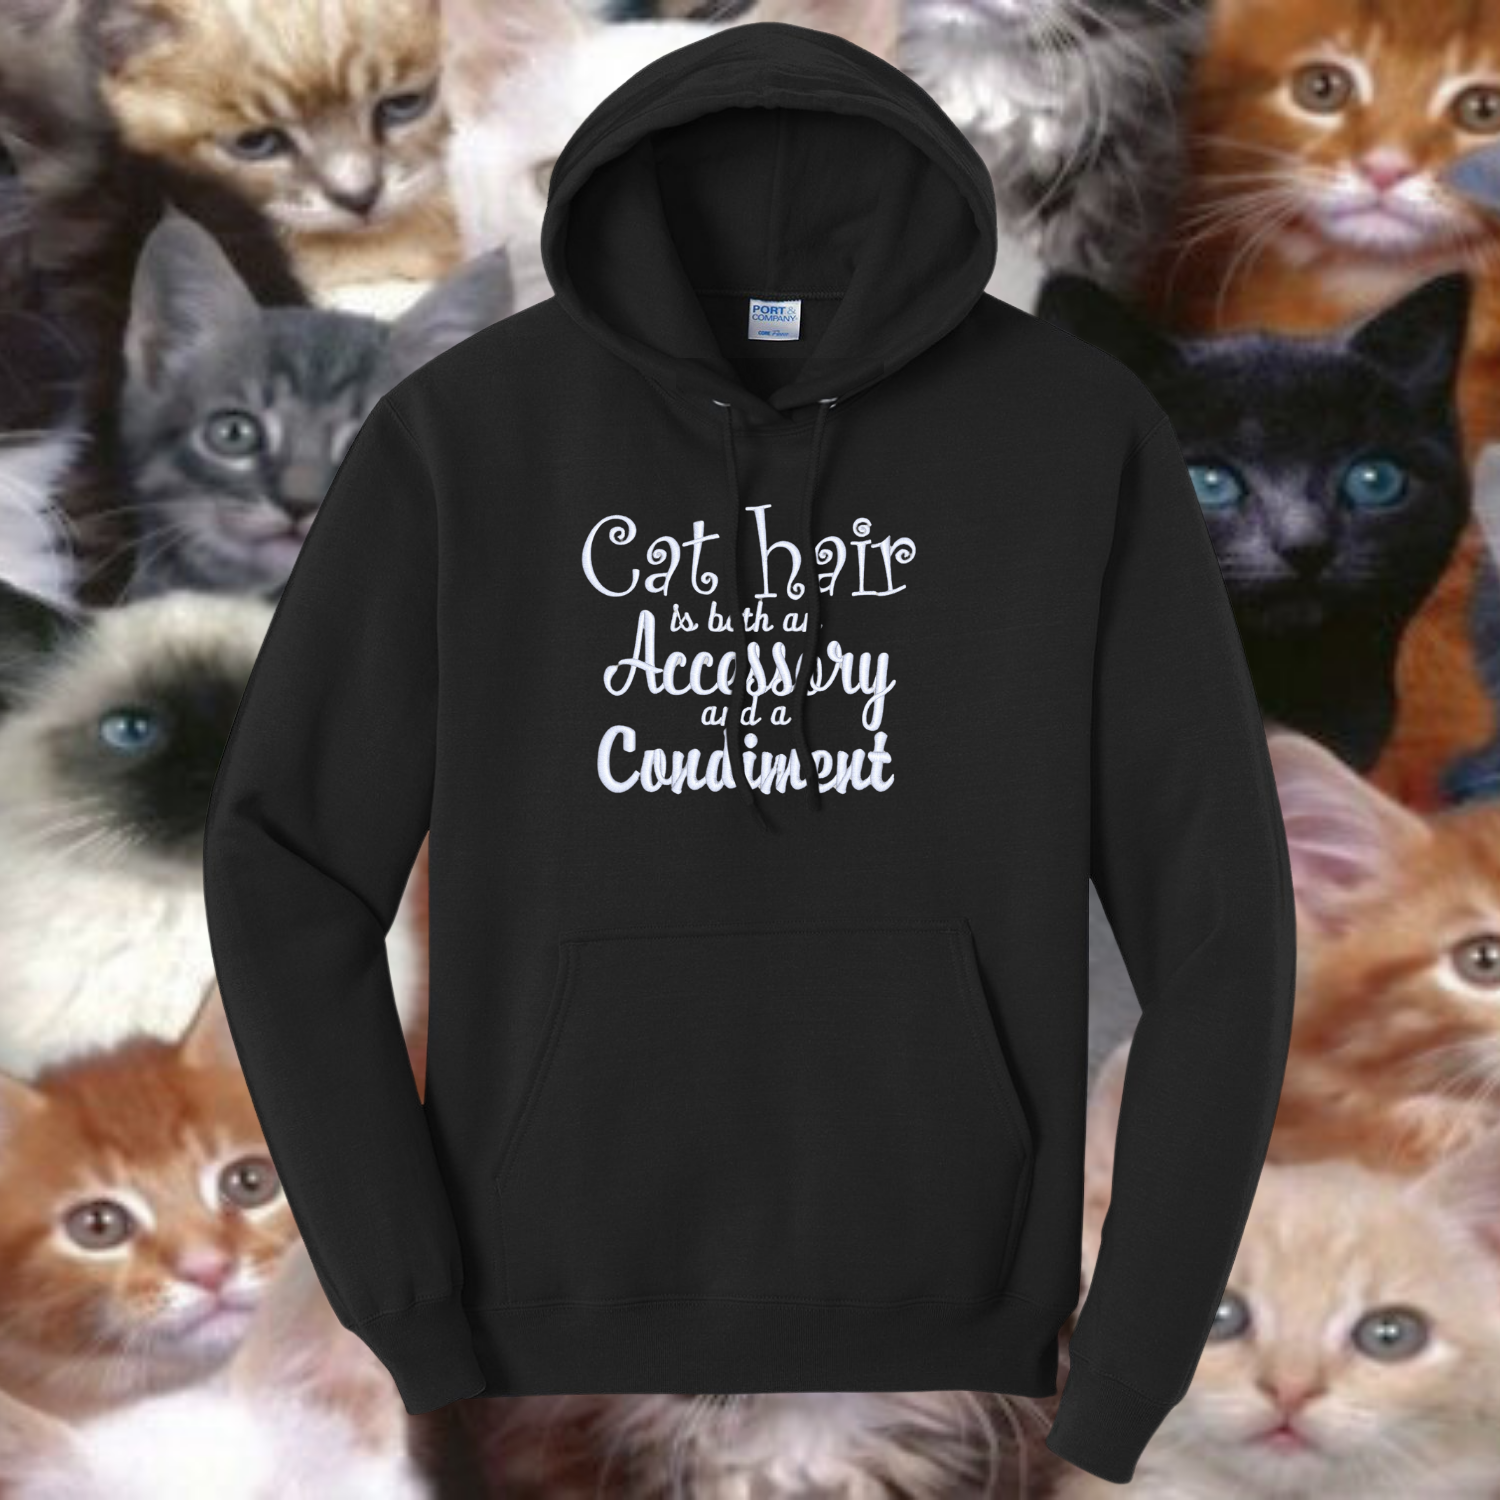 Cat Hair is Both an Accessory and a Condiment Black Hoodie, Unisex